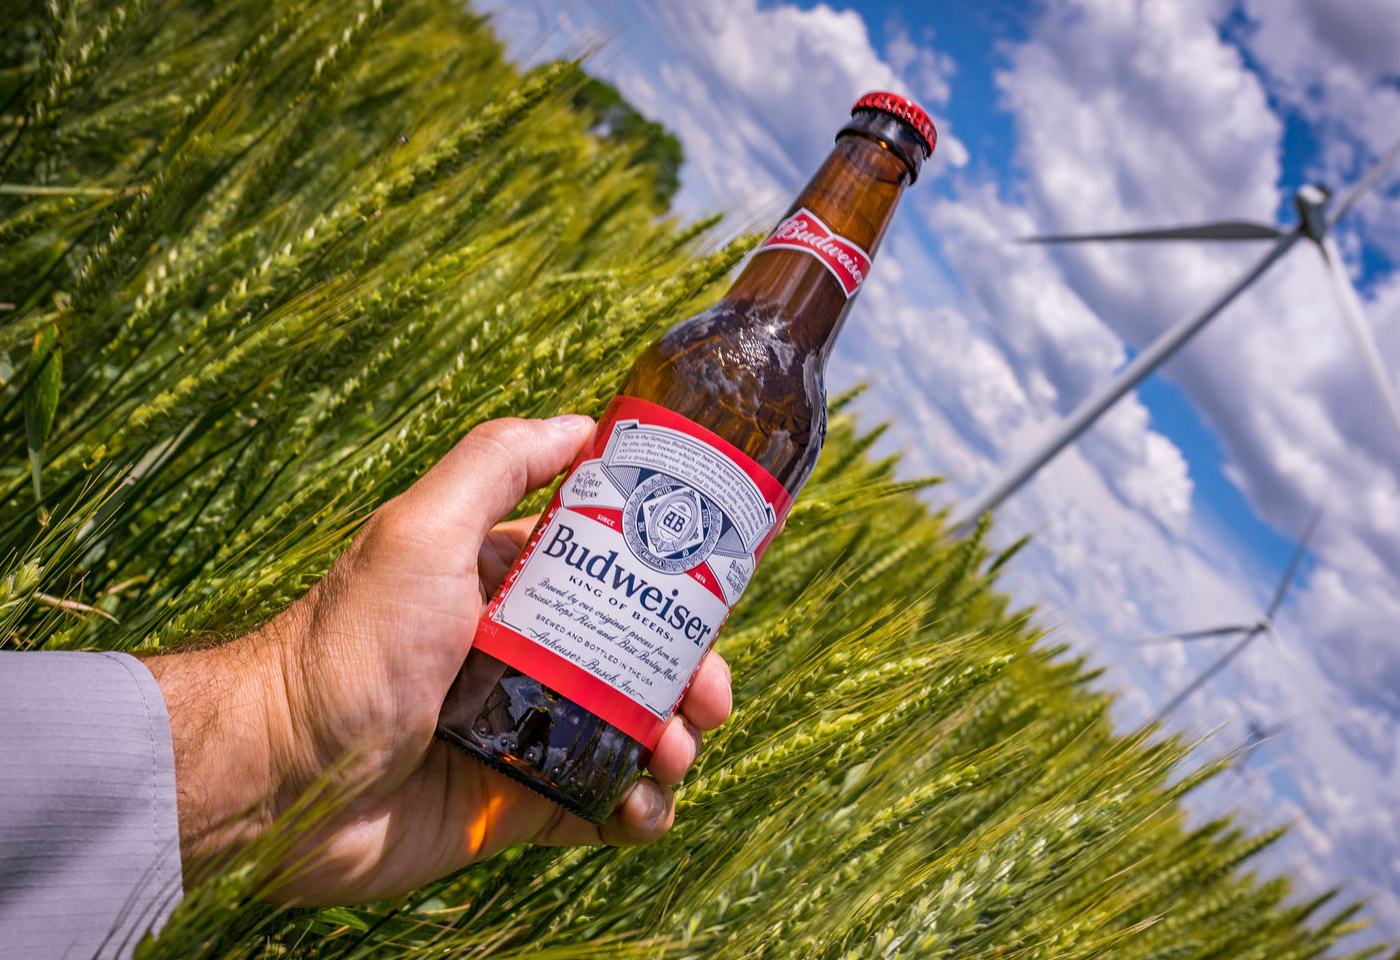 Budweiser bottle being displayed in a field of wheat and barley with a wind turbine visible in background